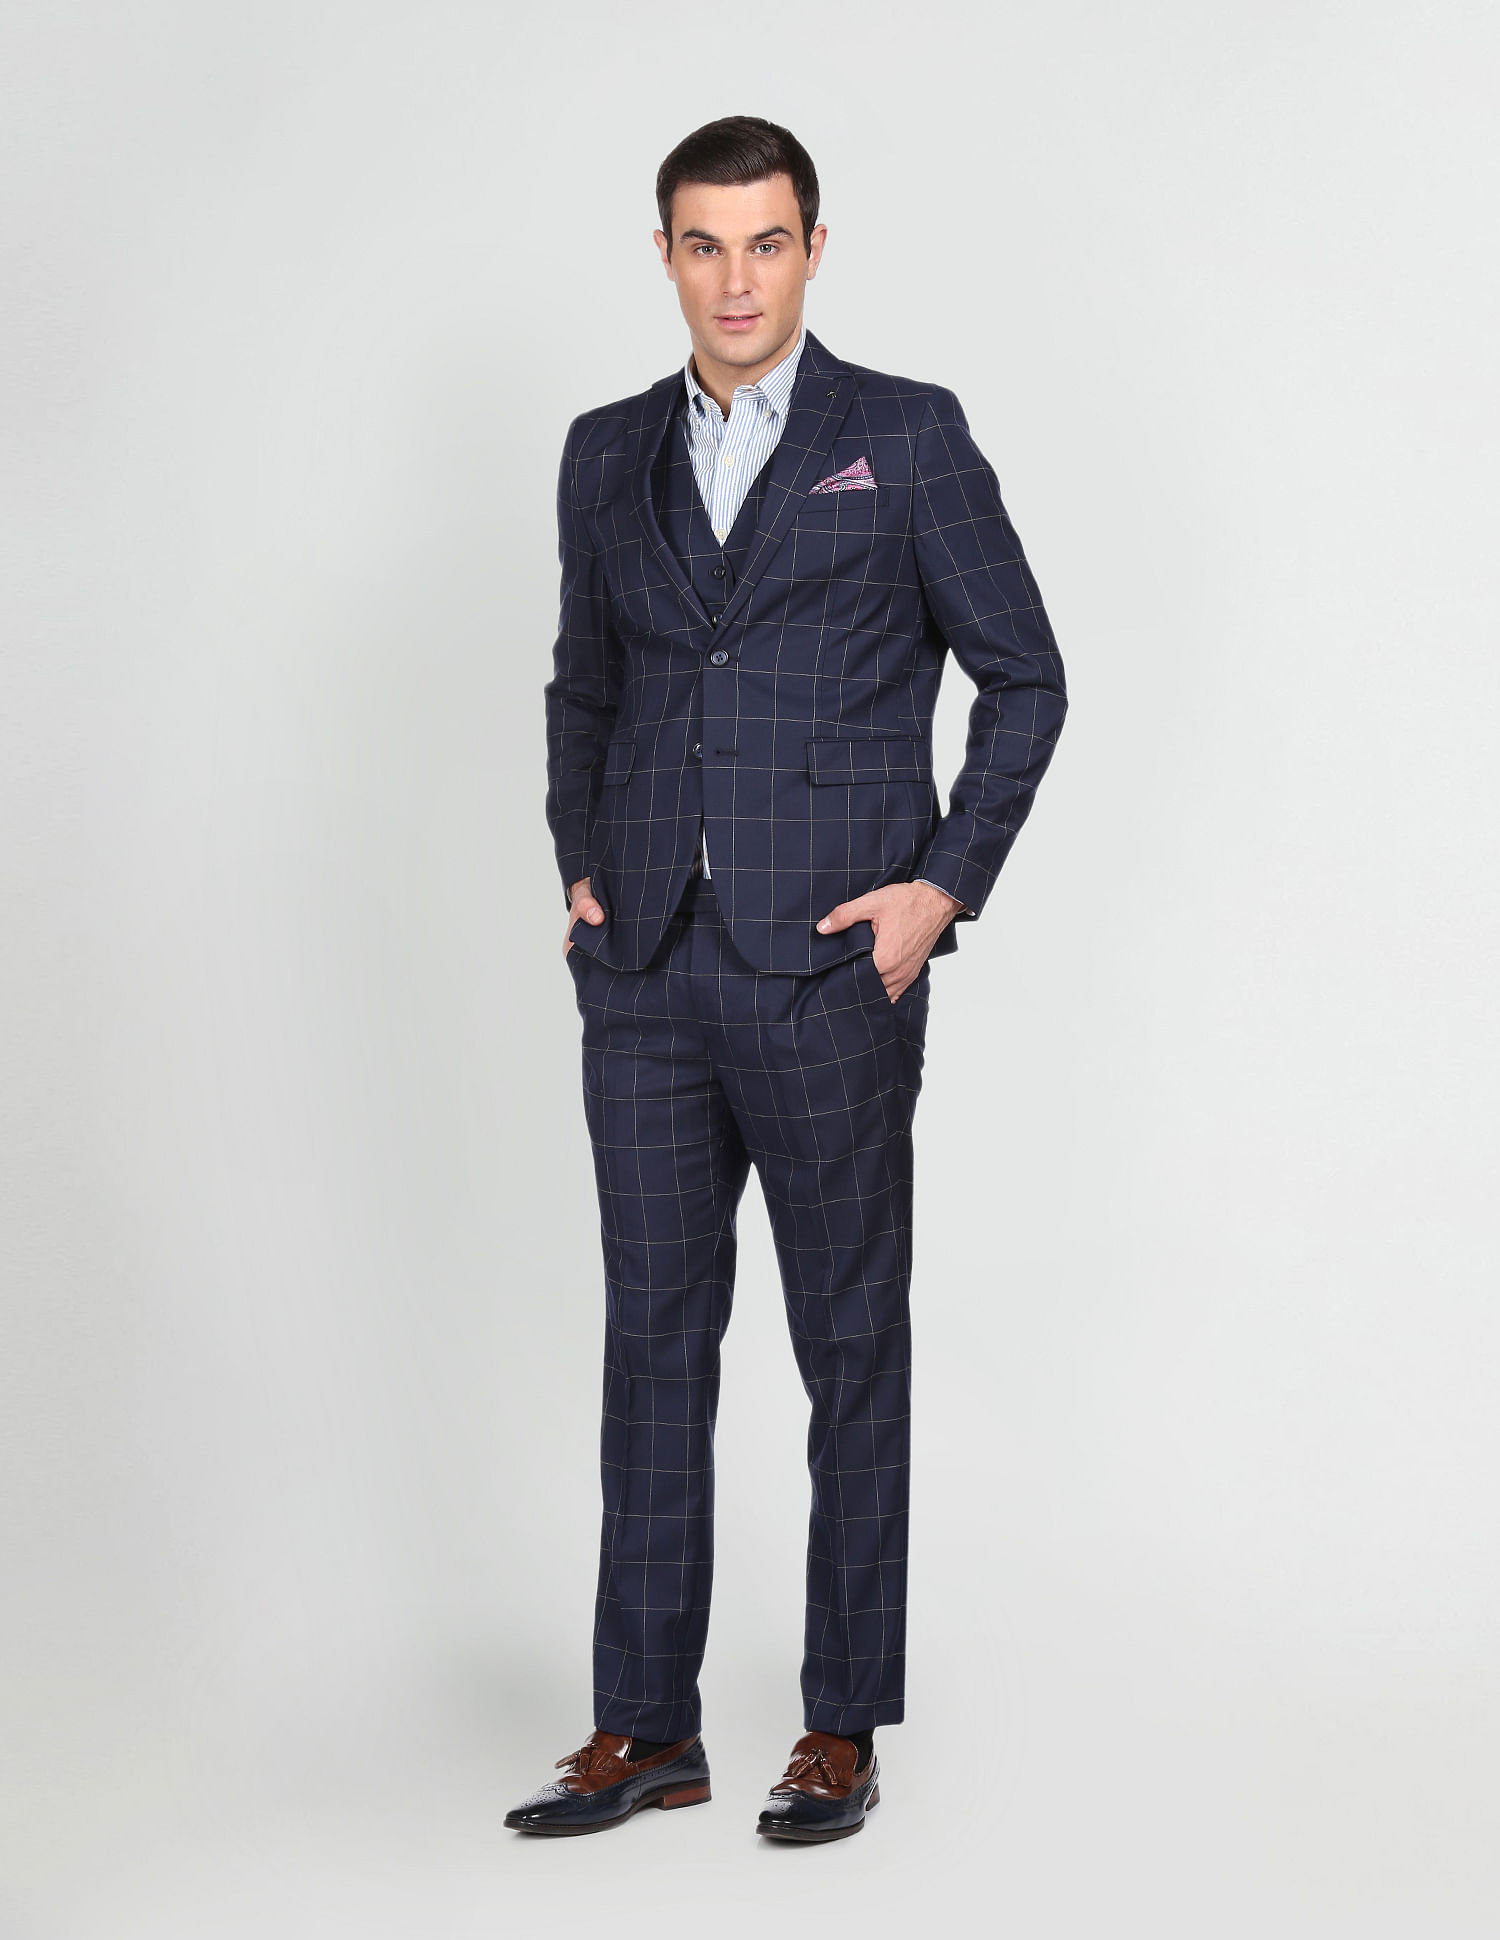 Men's 3 Piece Suit Check Wool Feel Tailored Fit Wedding Prom Harry | Fruugo  US